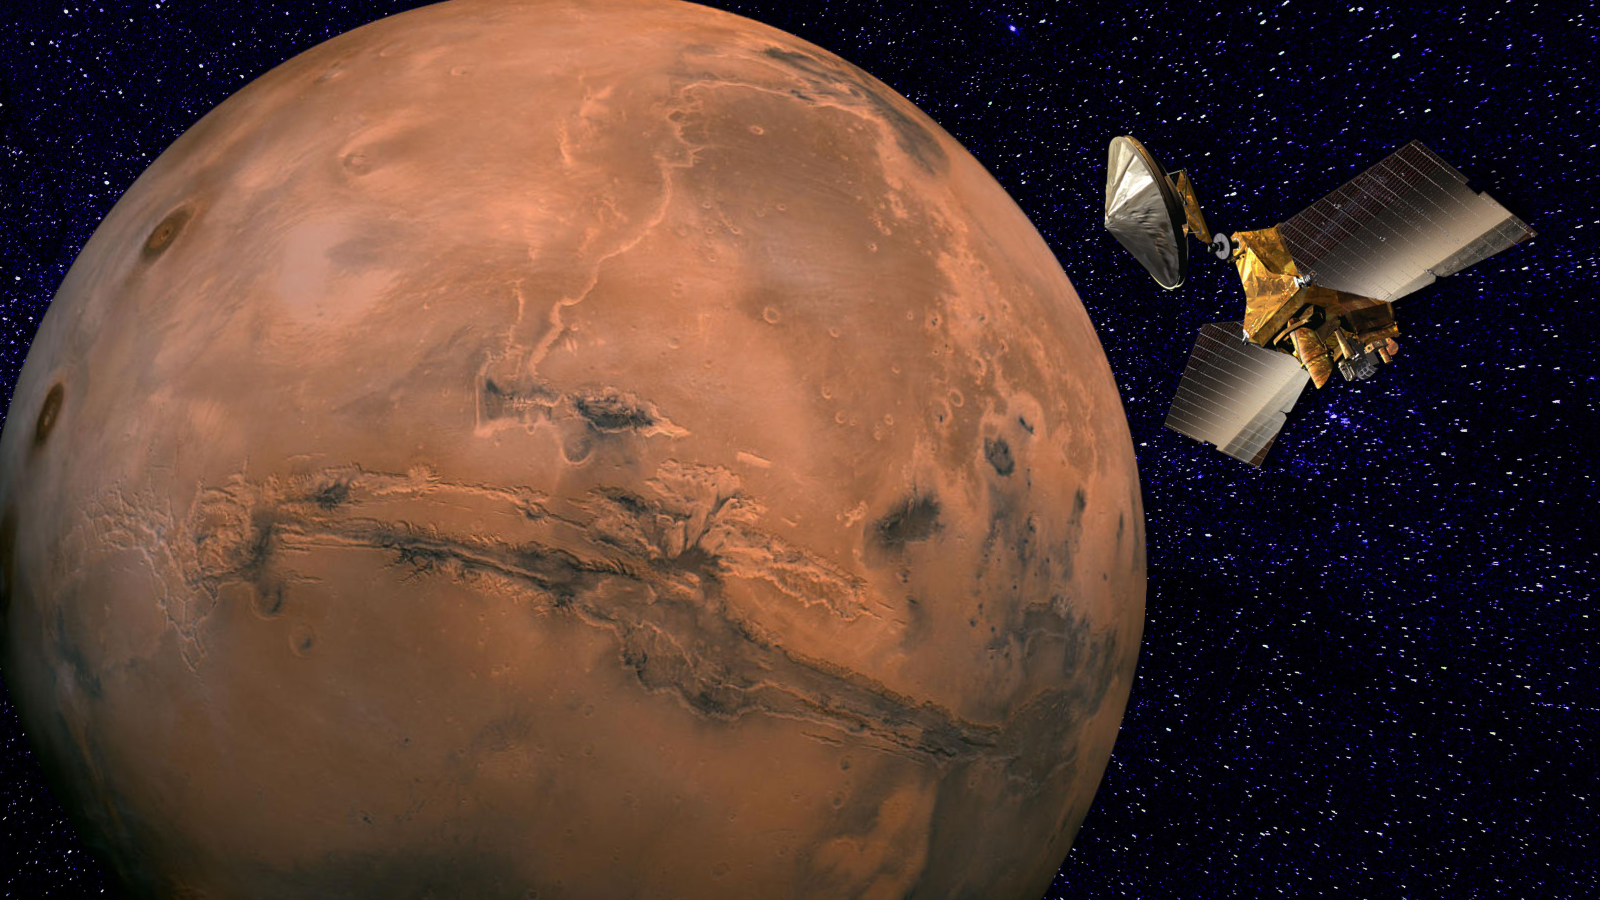 A view of a reddish-orange planet with a little spacecraft that has solar wings floating to the right. Both are seen in space.